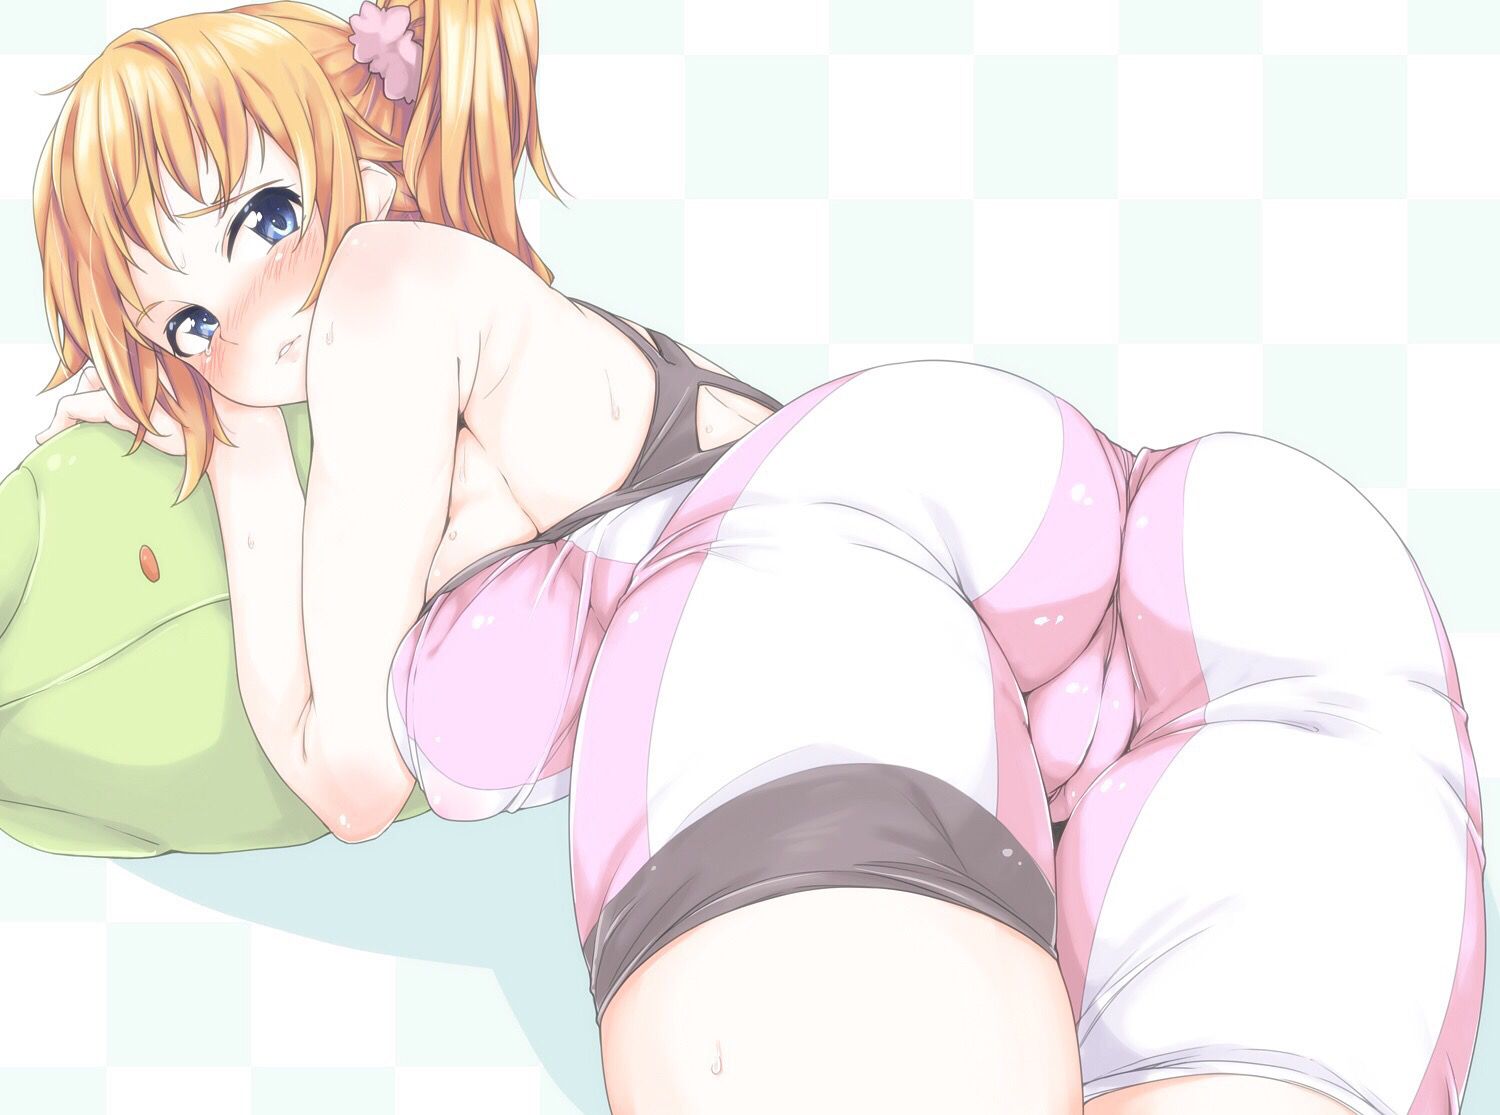 [Image] naughty ass pretty two-dimensional illustrations of wwwwwww 12